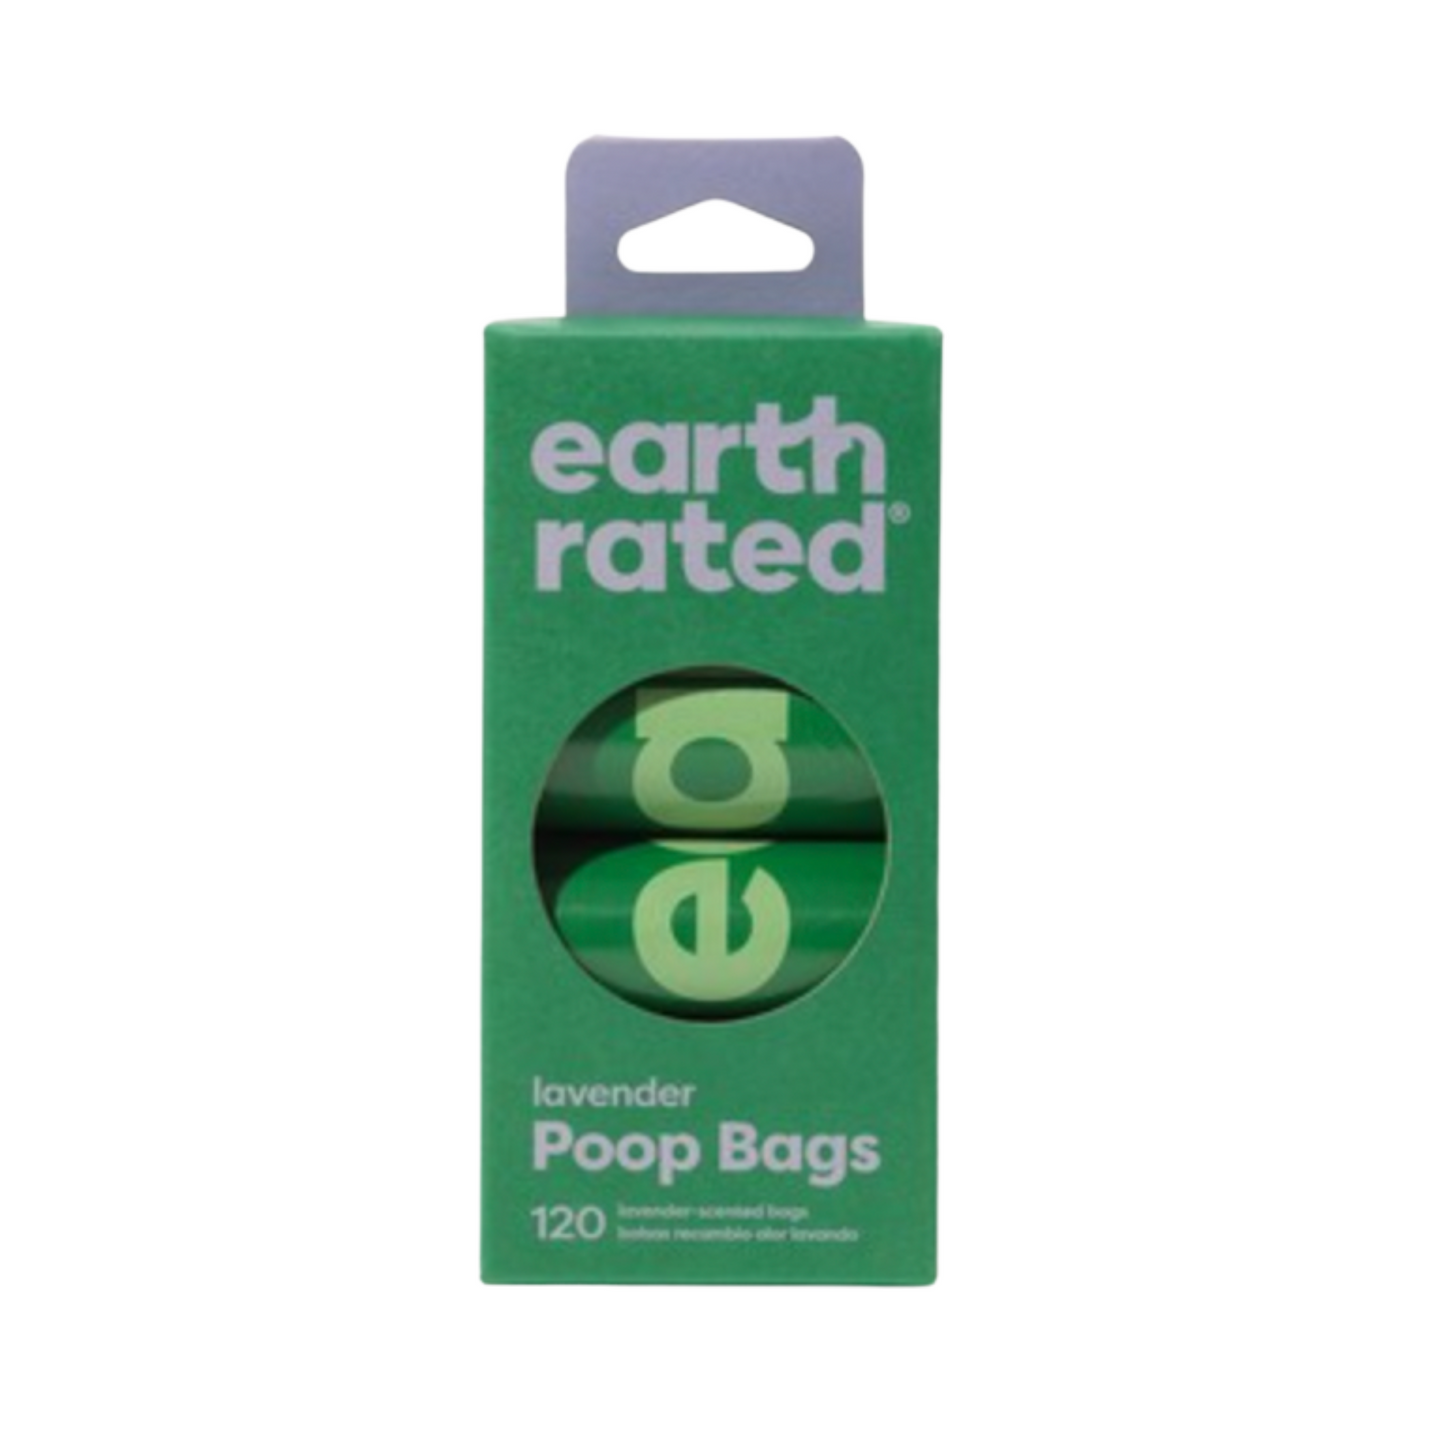 Earth Rated Poop Bags 120 Lavender Scented Bags Without Handles on a Roll